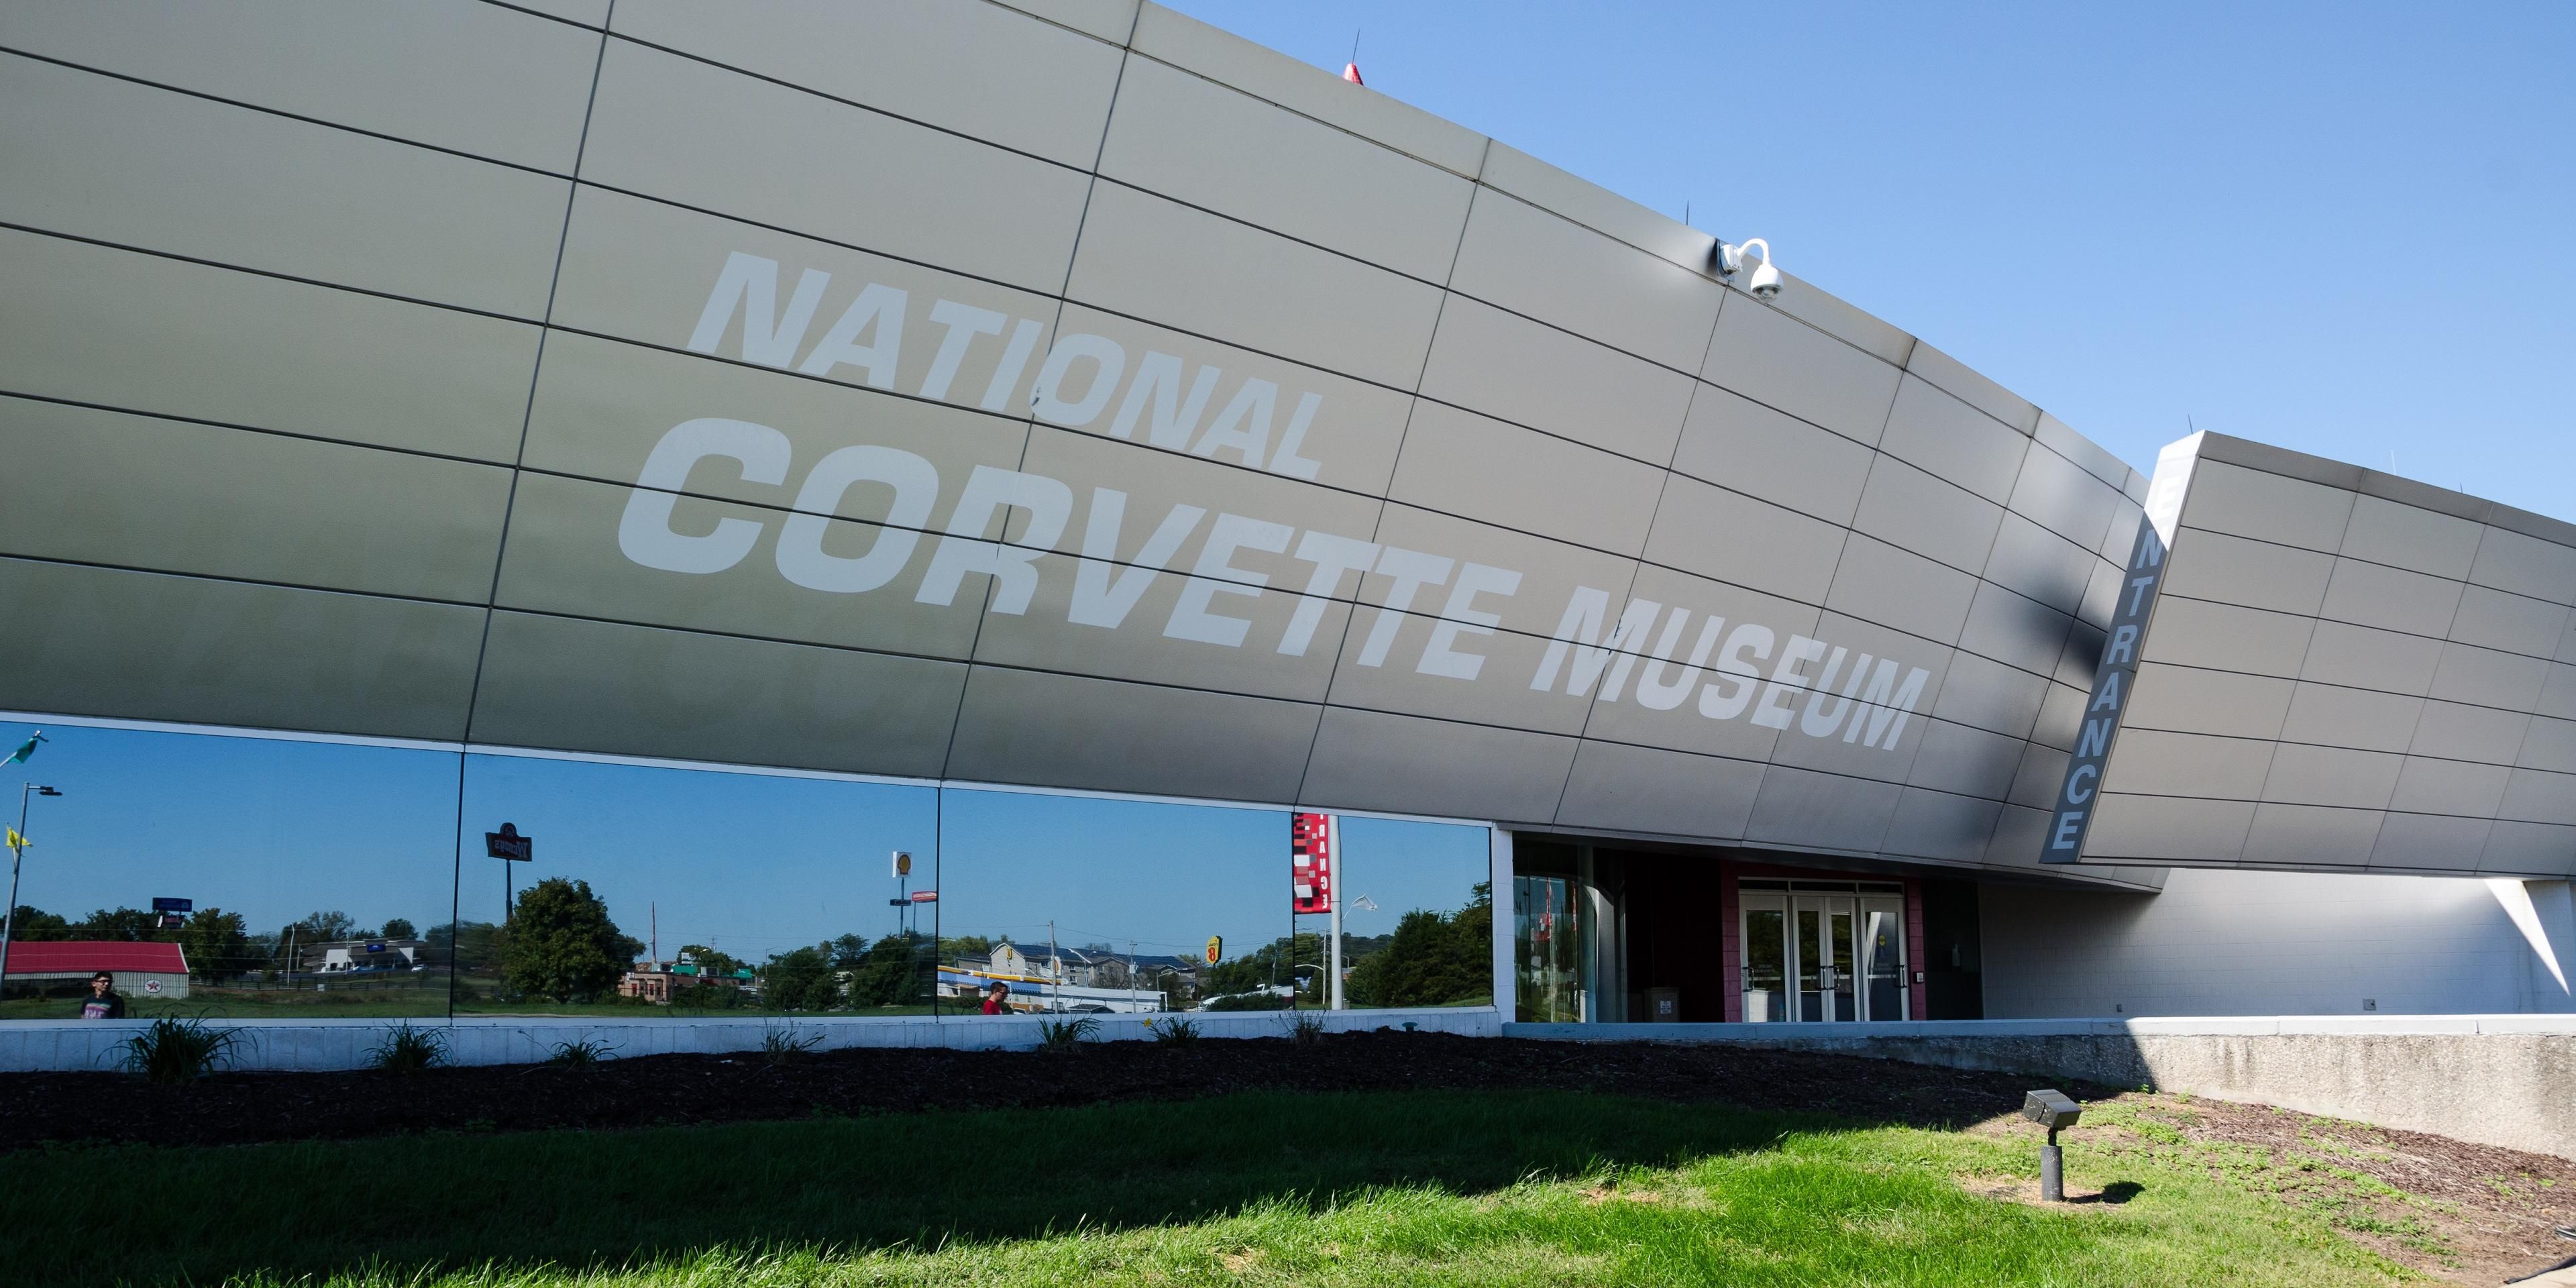 The National Corvette Museum is only a 30 minute drive. Located just a quarter mile from the Corvette Assembly Plant. Don't miss the huge anniversary car shows each Labor Day. 